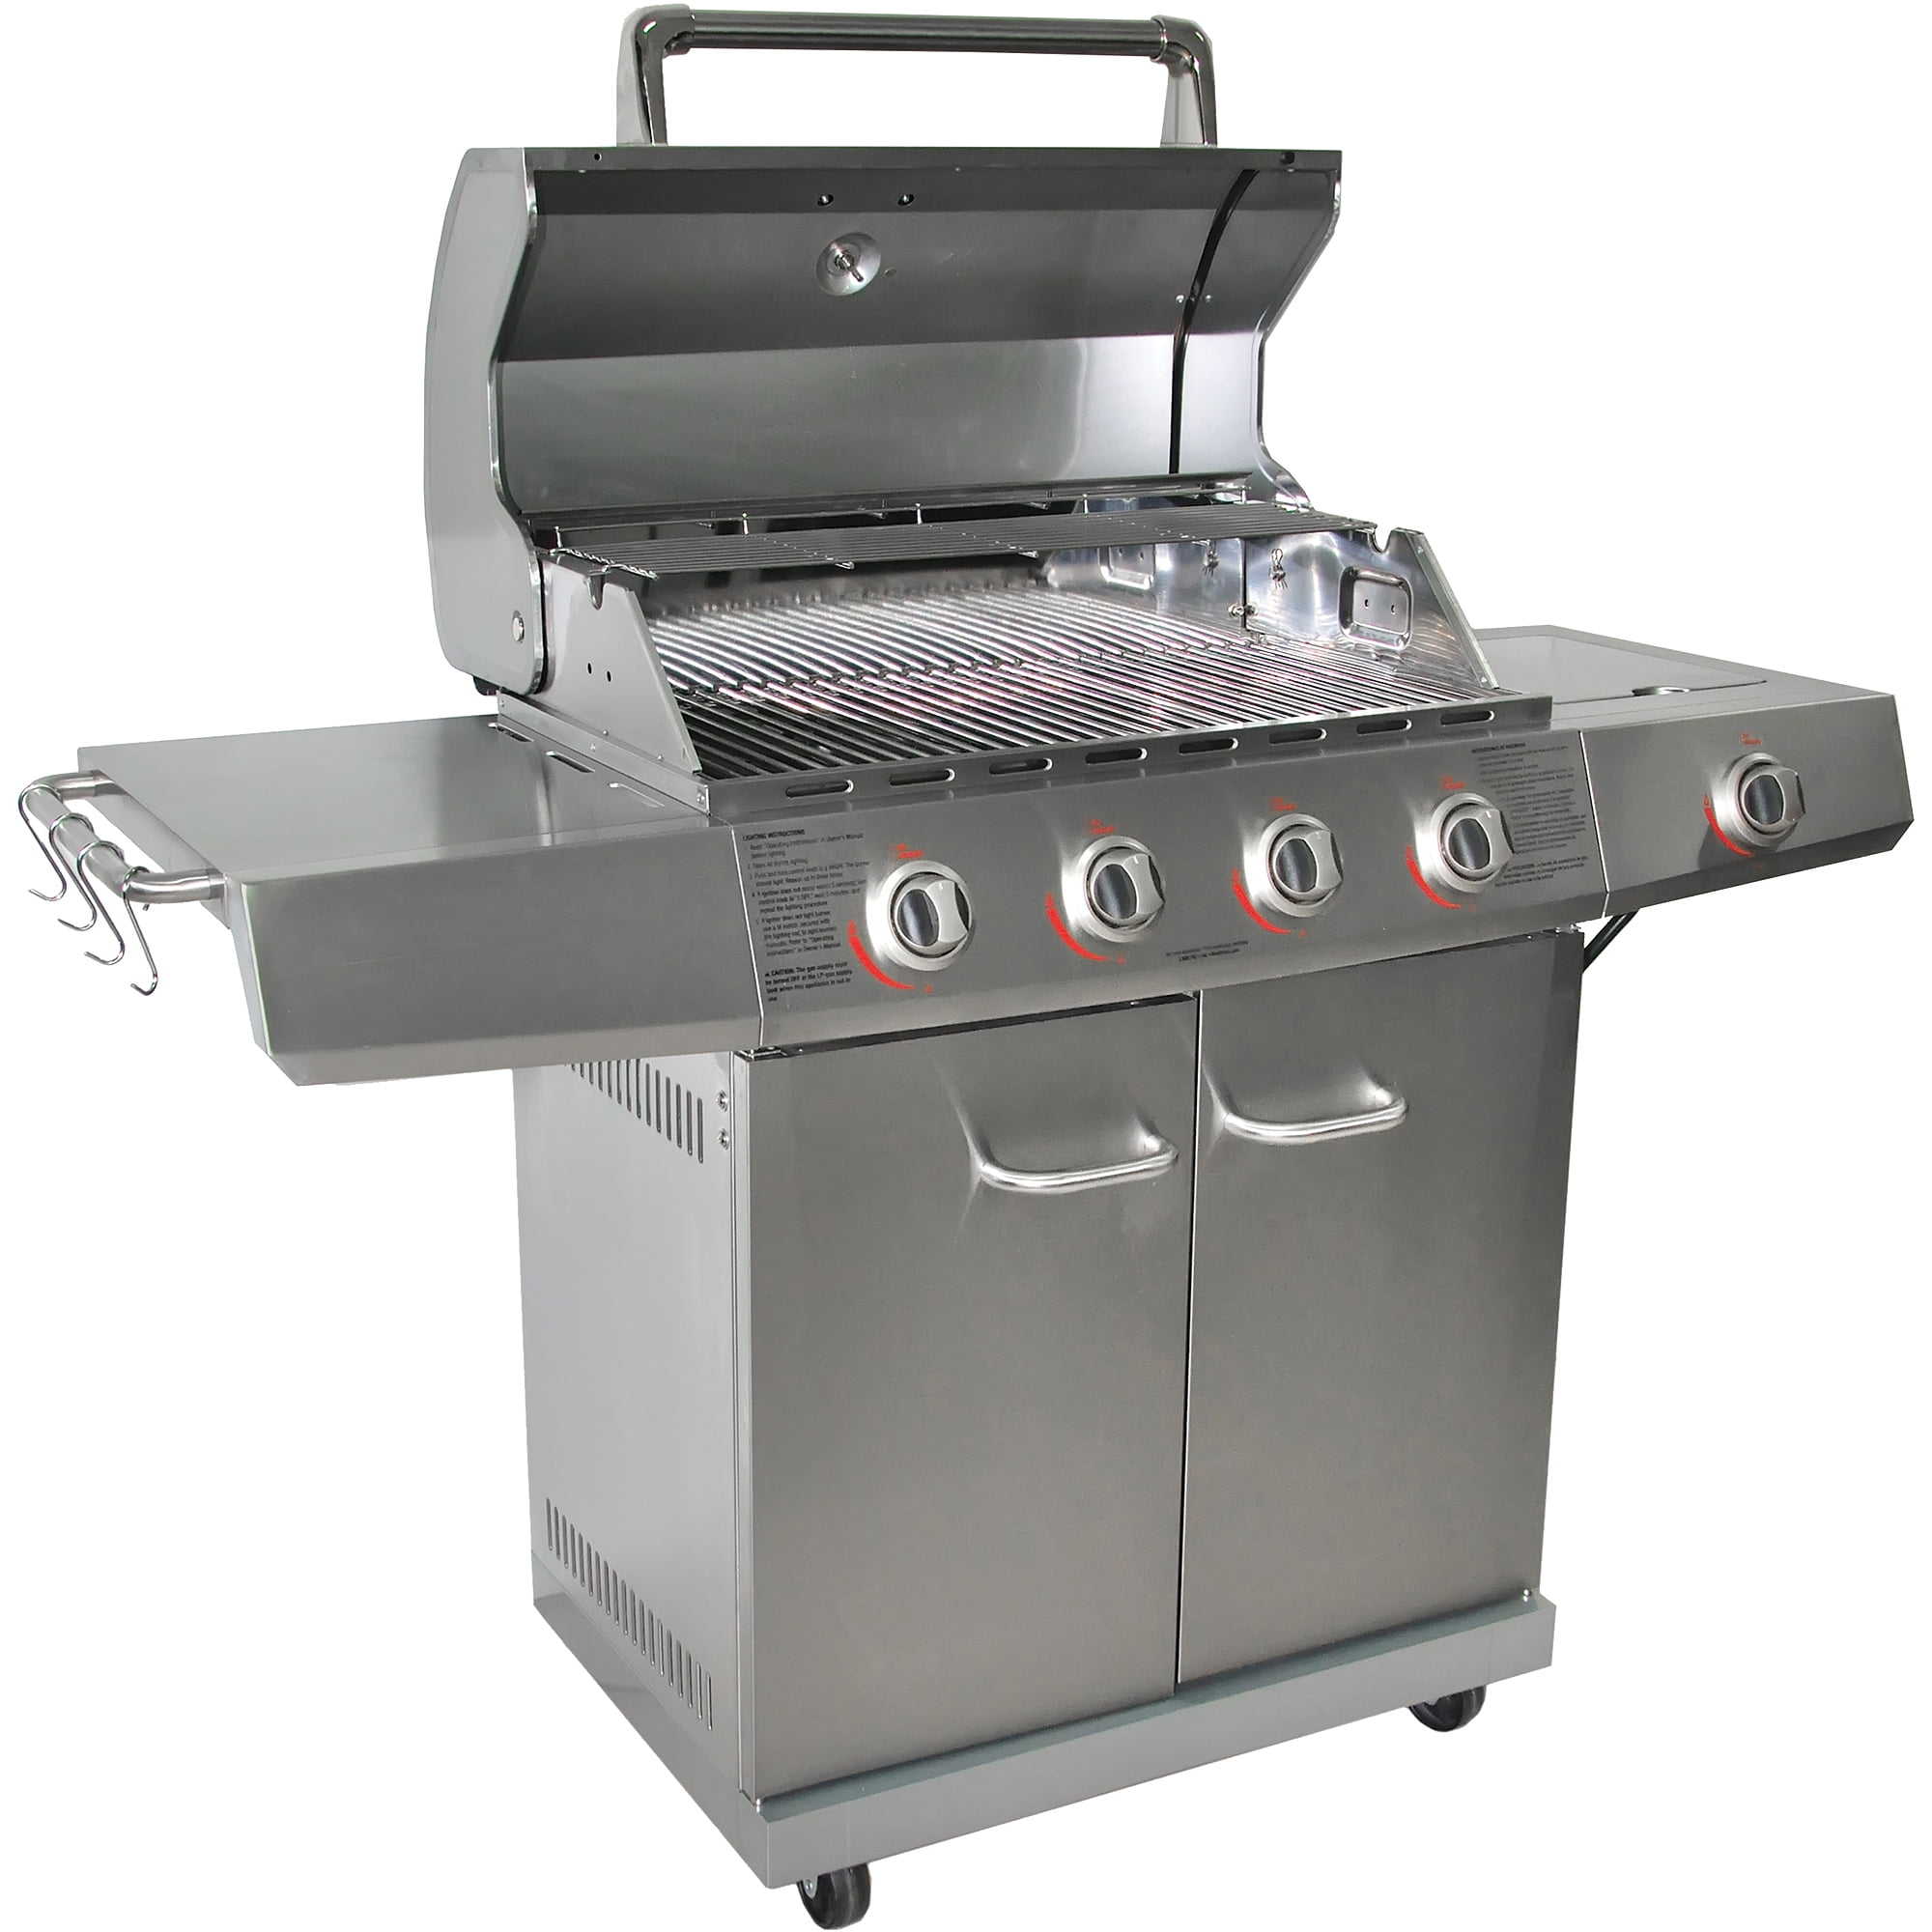 Better Homes and Gardens 4 Burner Gas Grill Stainless Steel